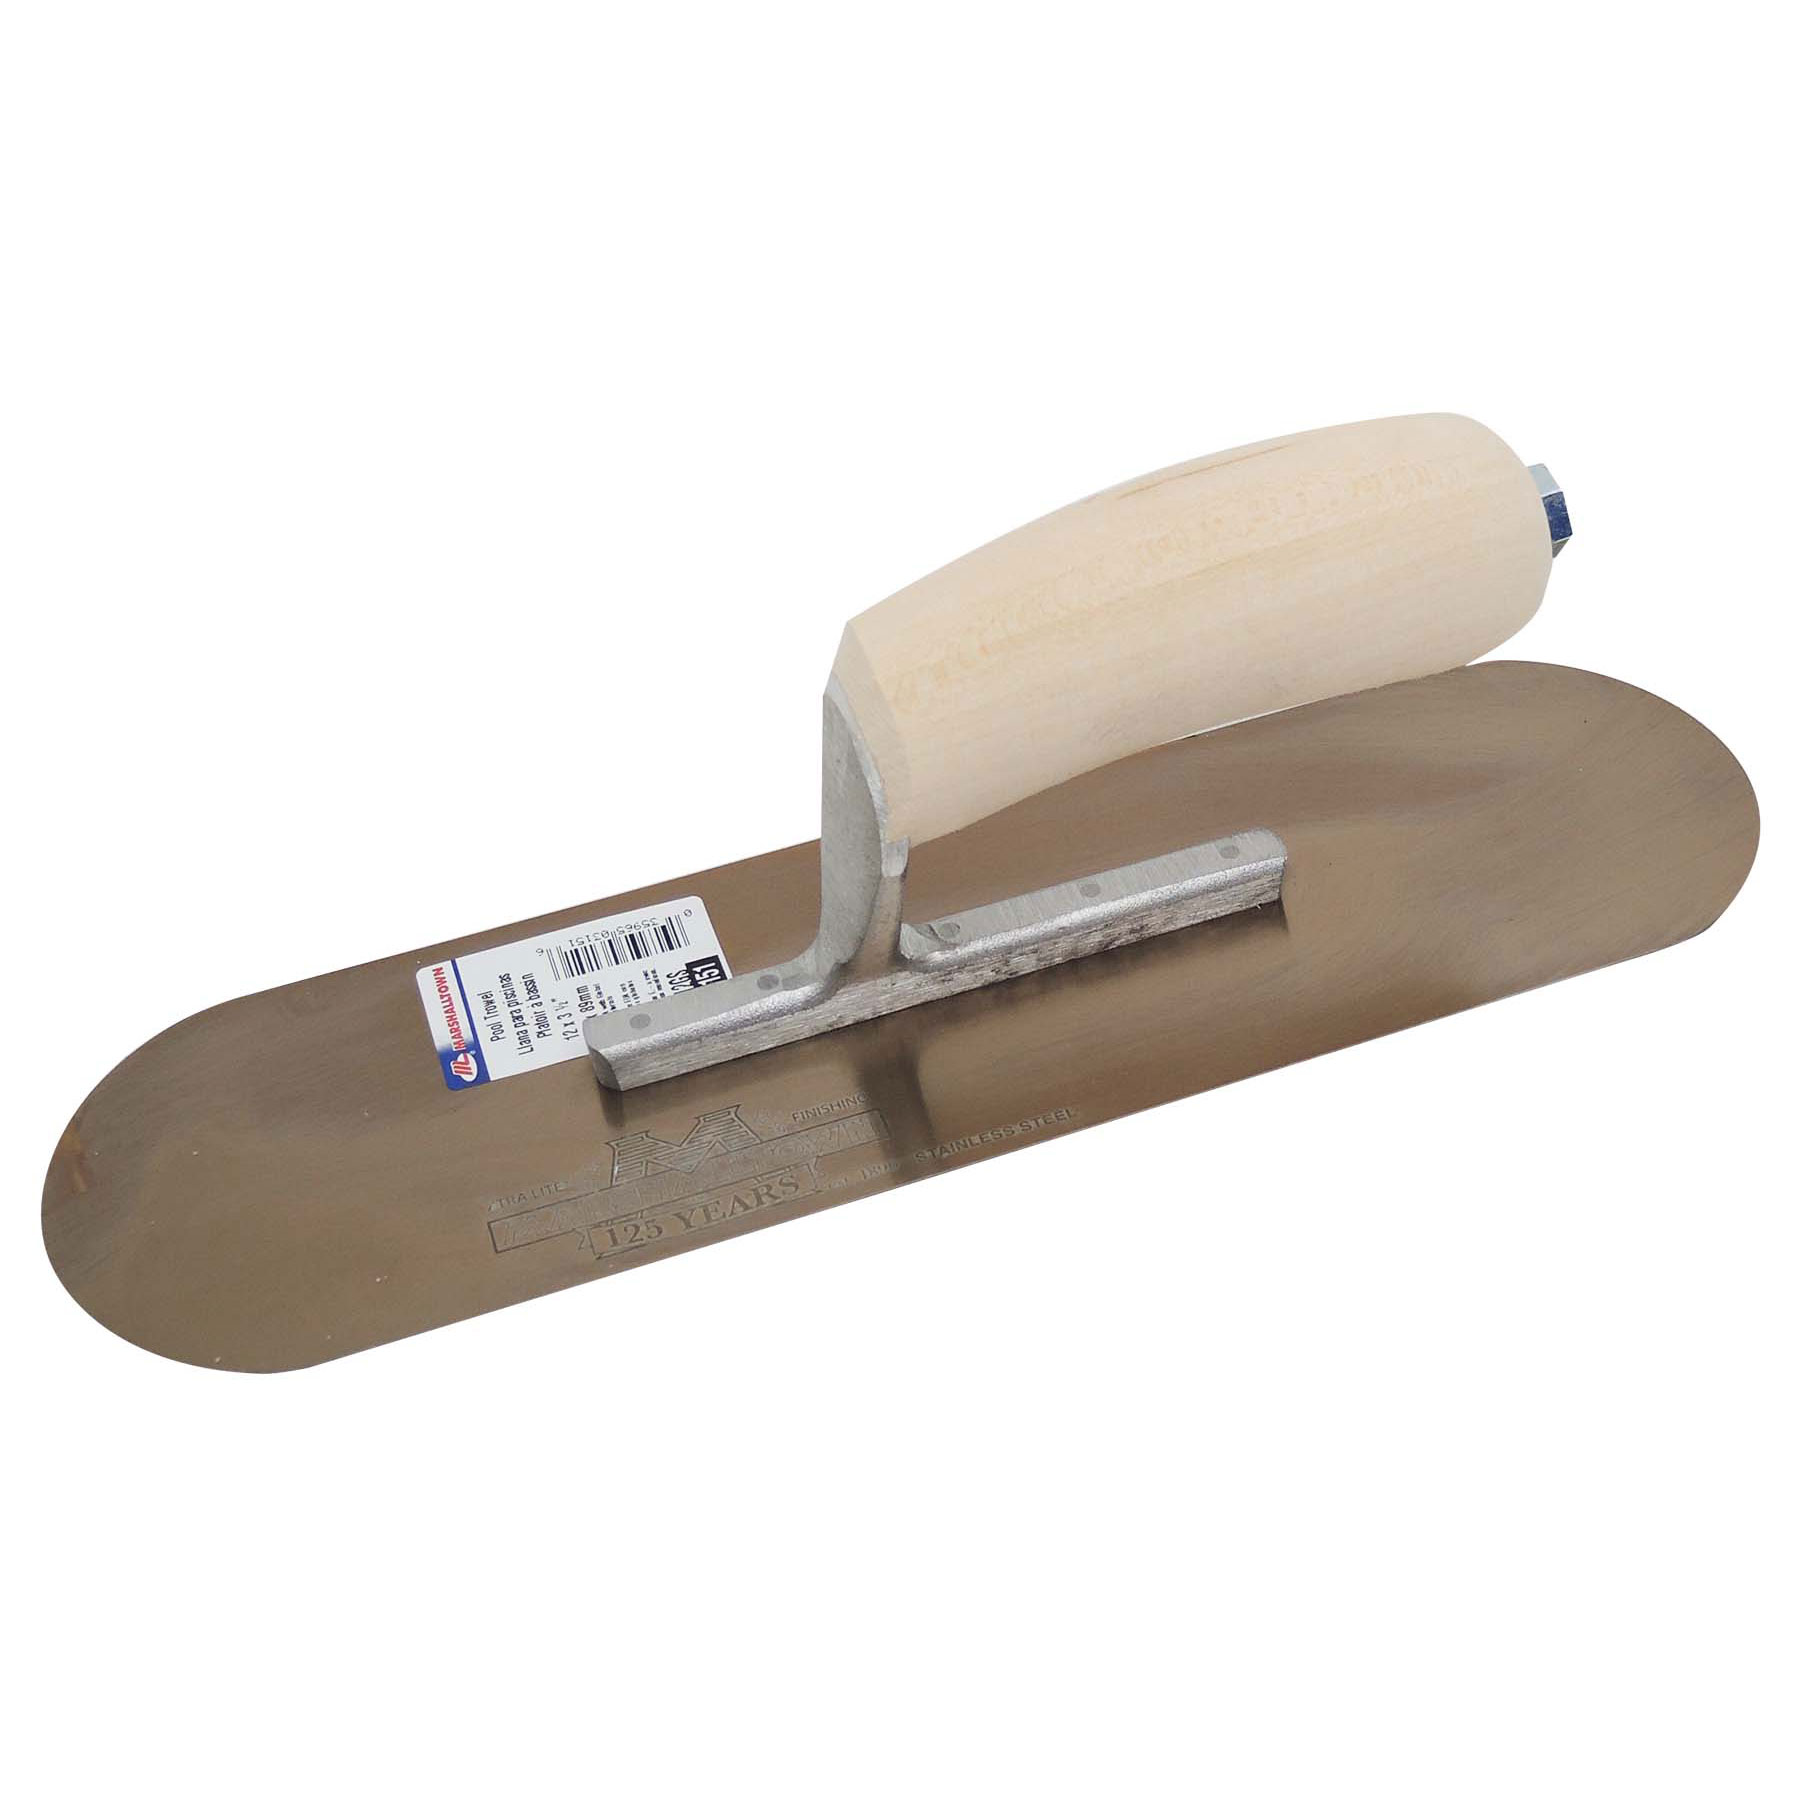 Marshalltown SP12GS 12in x 3-1/2in Golden Stainless Steel Pool Trowel with Wood Handle SP12GS